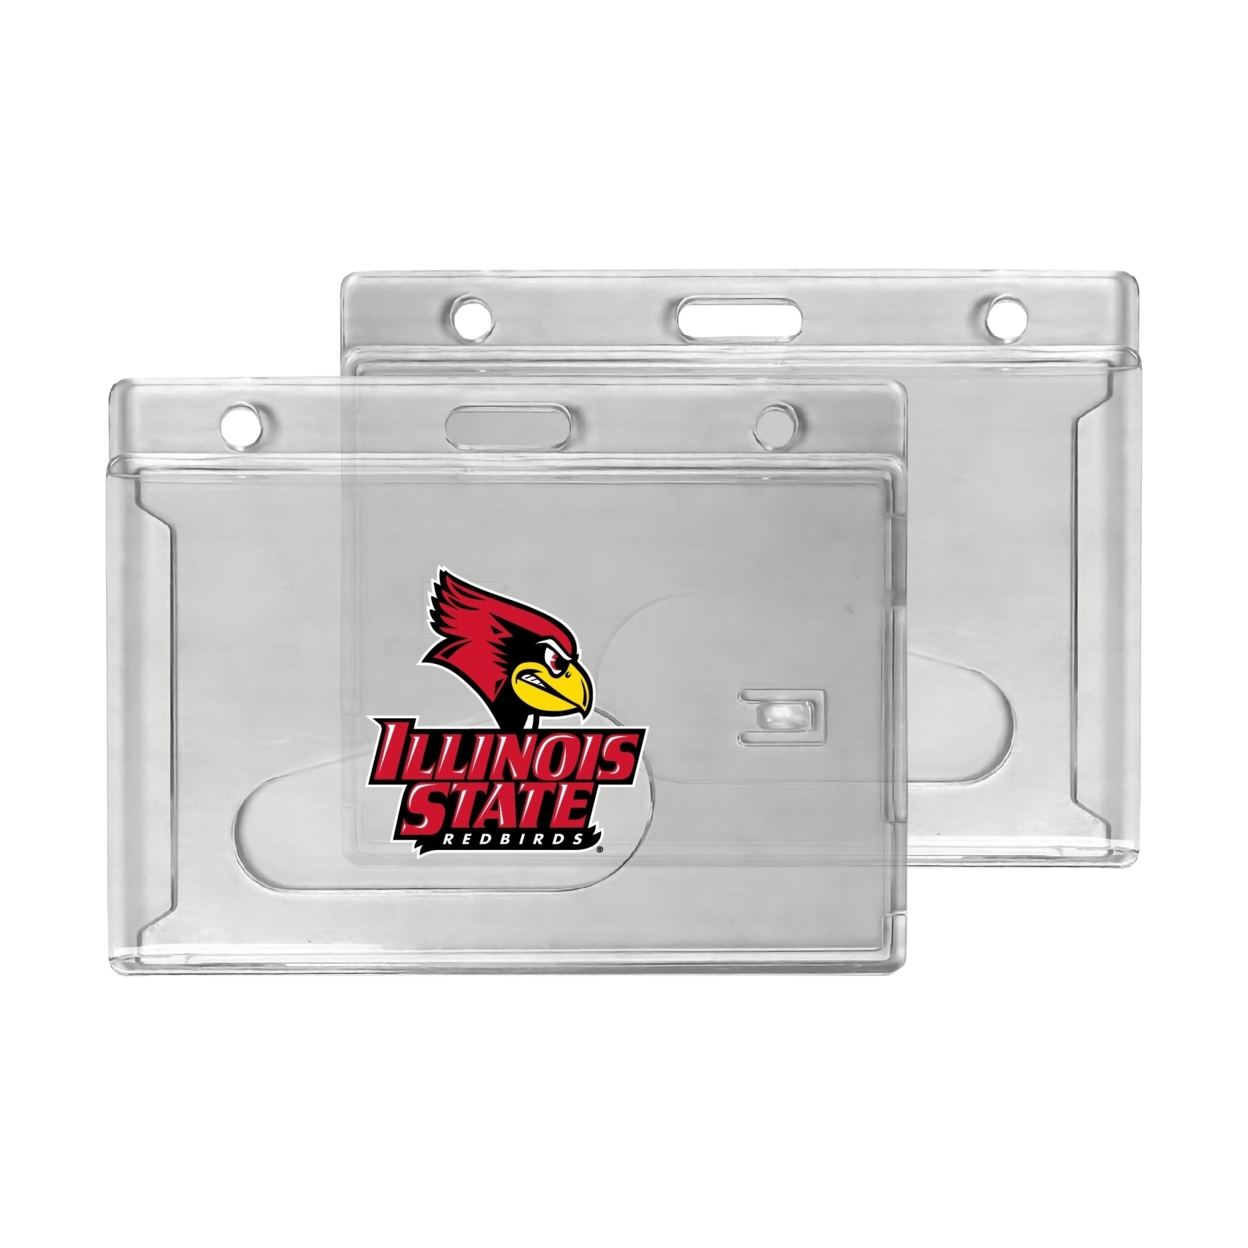 Illinois State Redbirds Clear View ID Holder